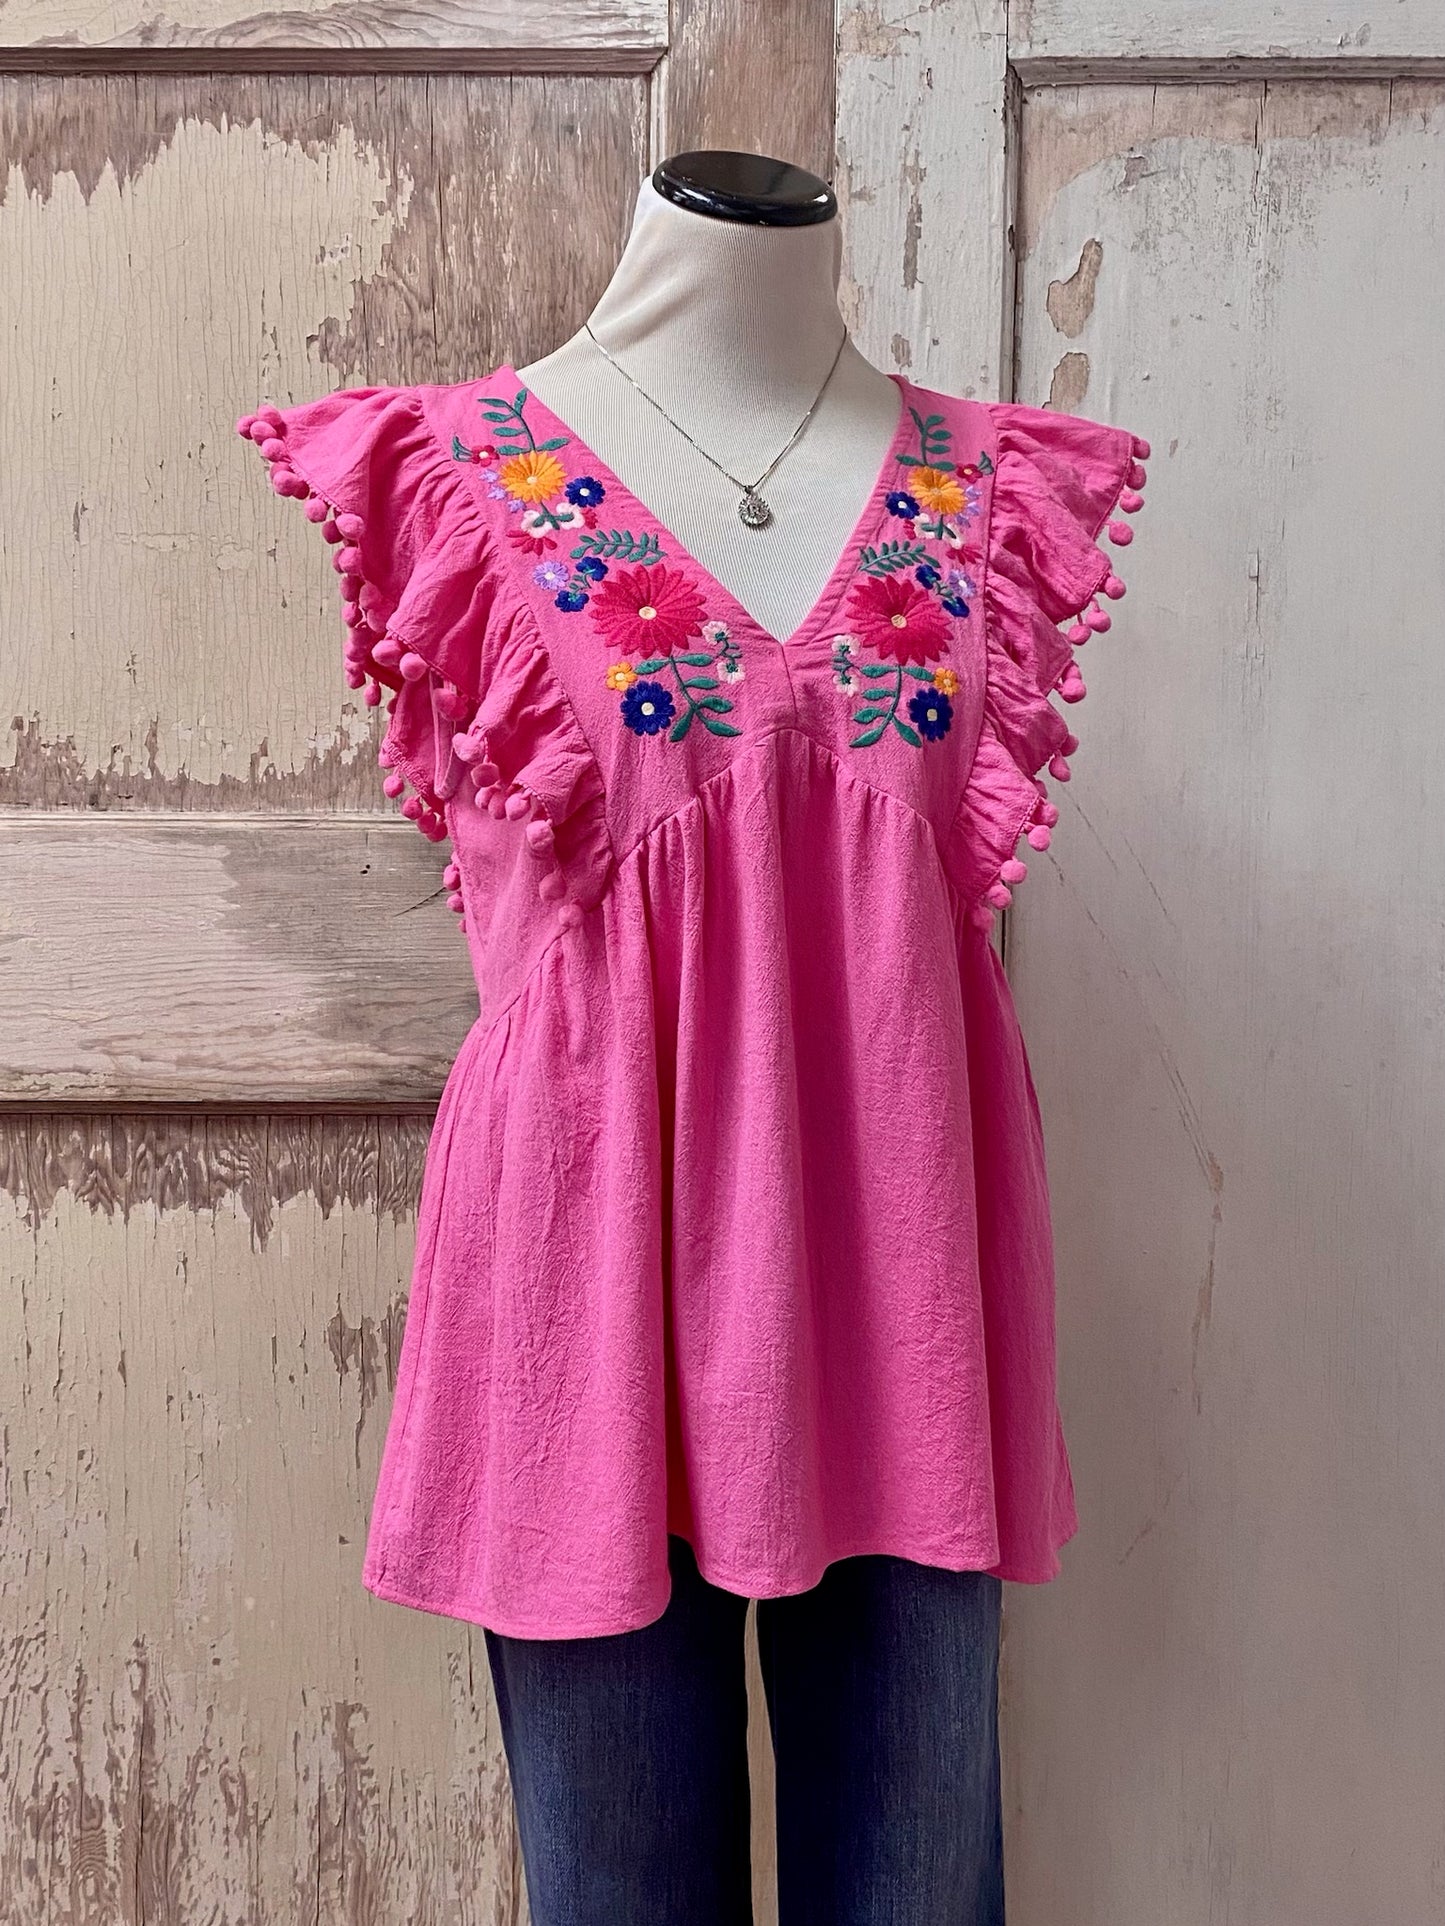 Floral Embroidered Top with Pom Pom Detail